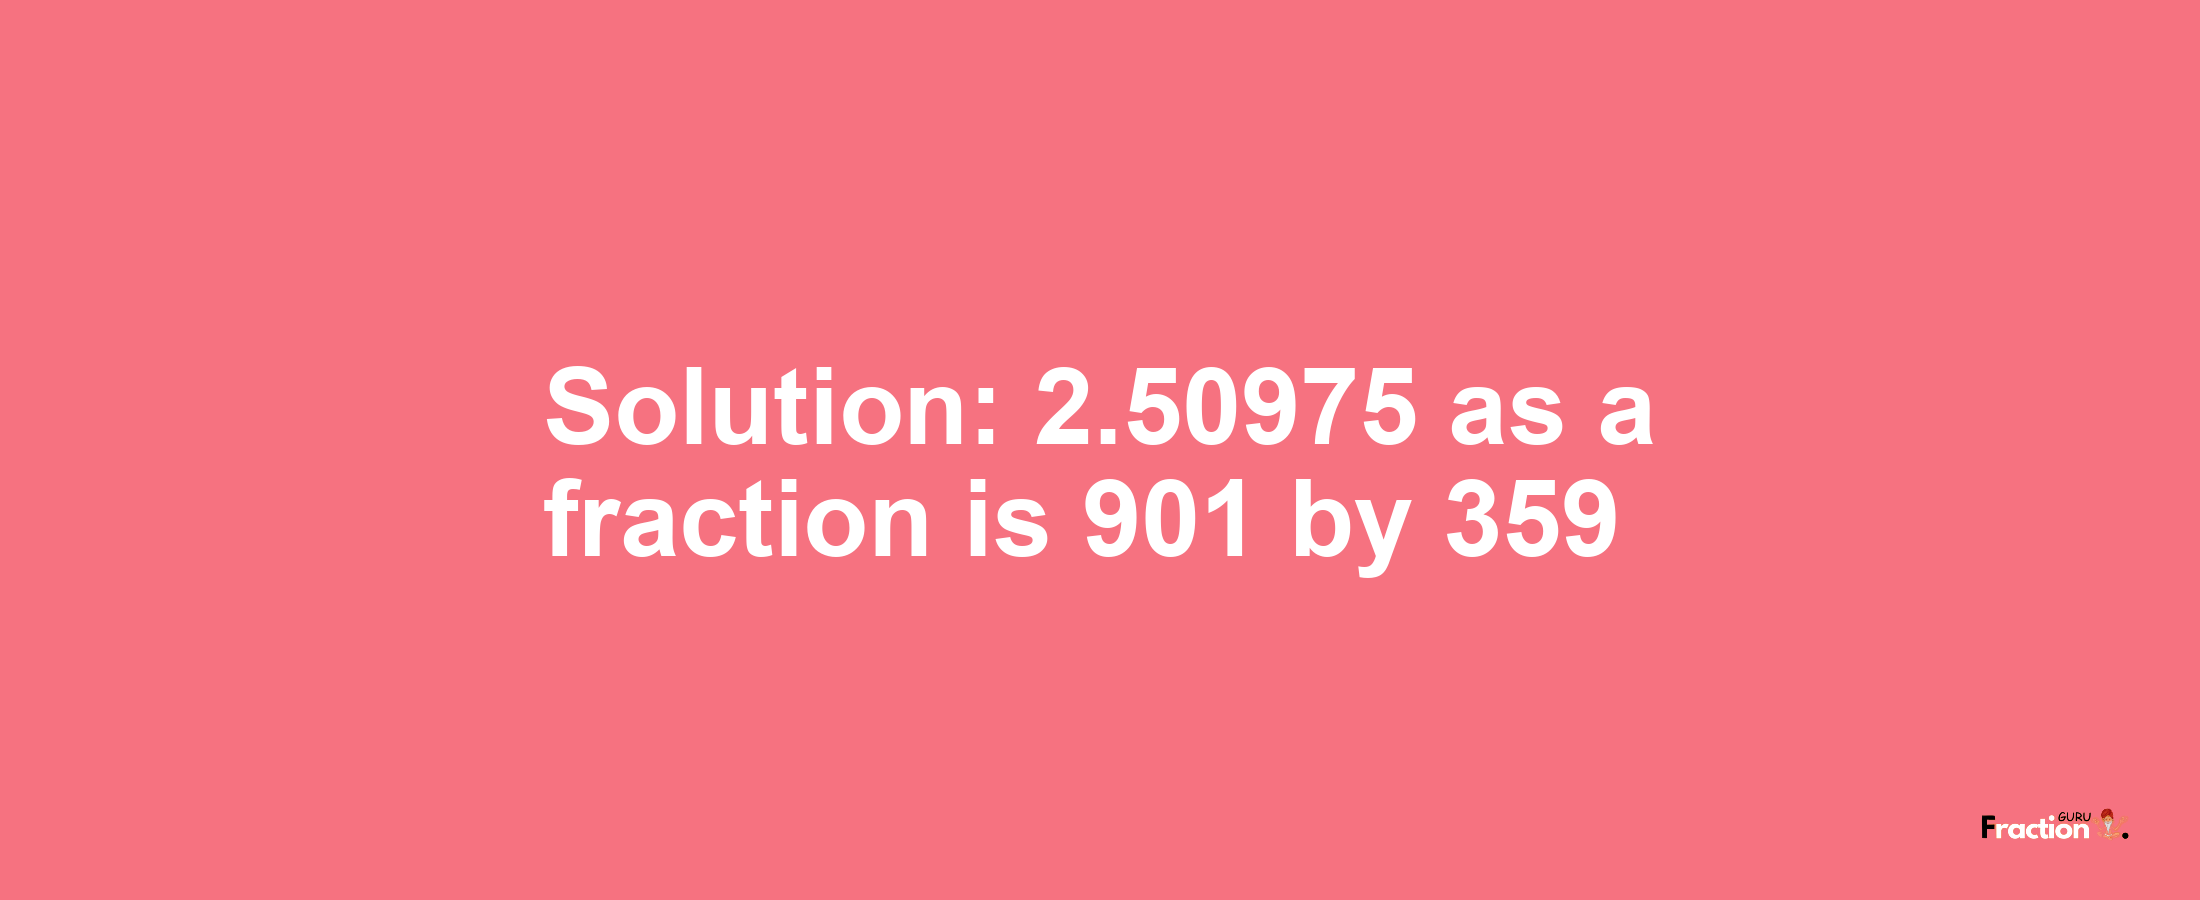 Solution:2.50975 as a fraction is 901/359